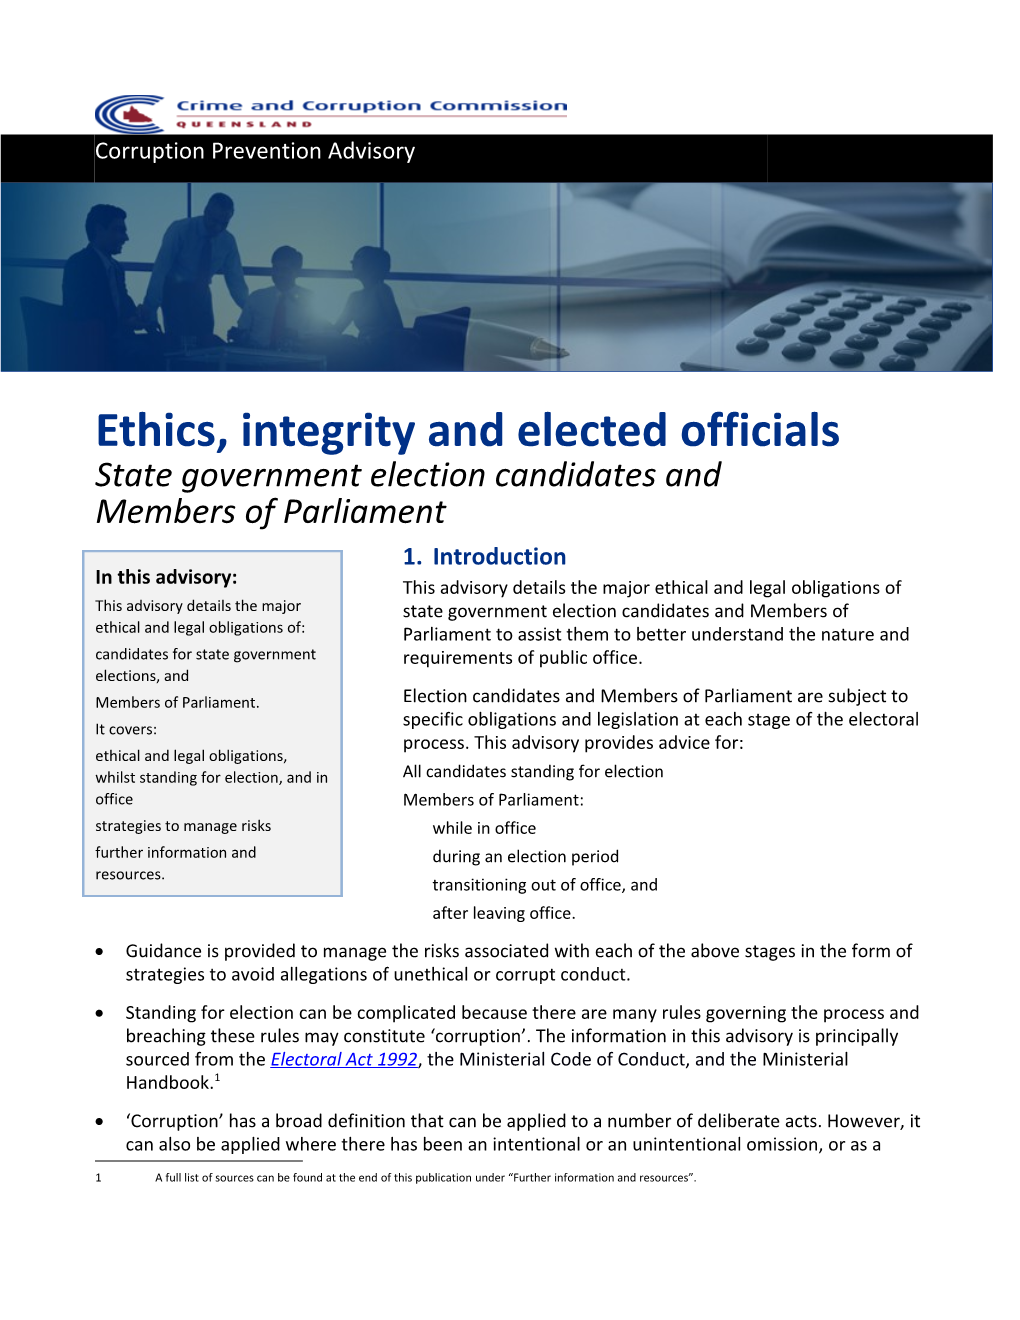 Ethics, Integrity and Elected Officials: State Government Election Candidates and Members